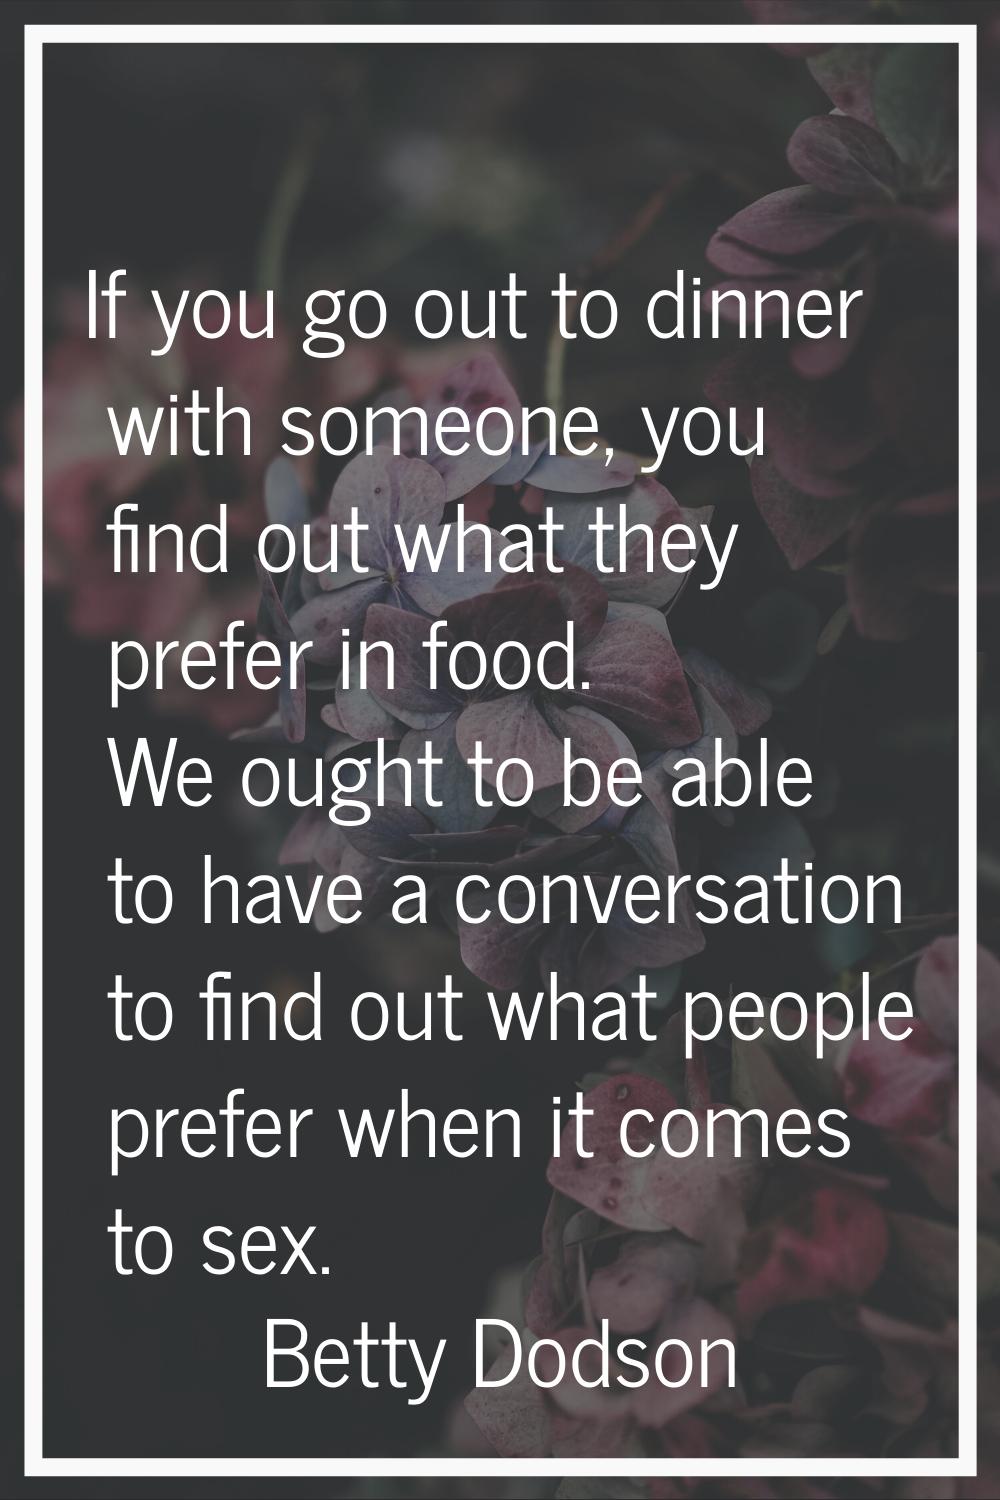 If you go out to dinner with someone, you find out what they prefer in food. We ought to be able to